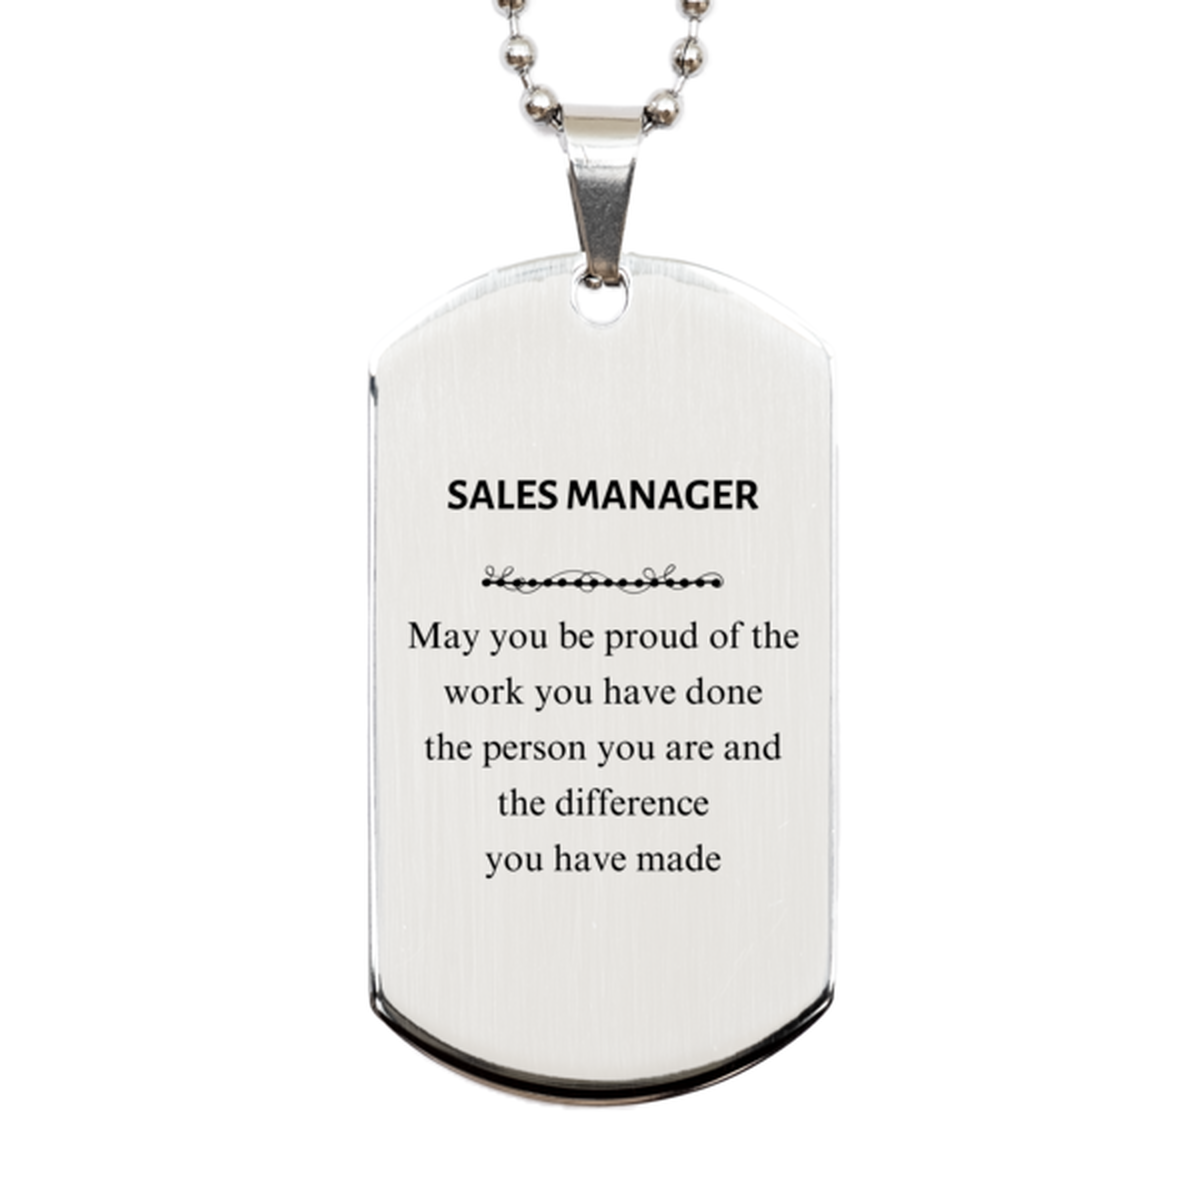 Sales Manager May you be proud of the work you have done, Retirement Sales Manager Silver Dog Tag for Colleague Appreciation Gifts Amazing for Sales Manager